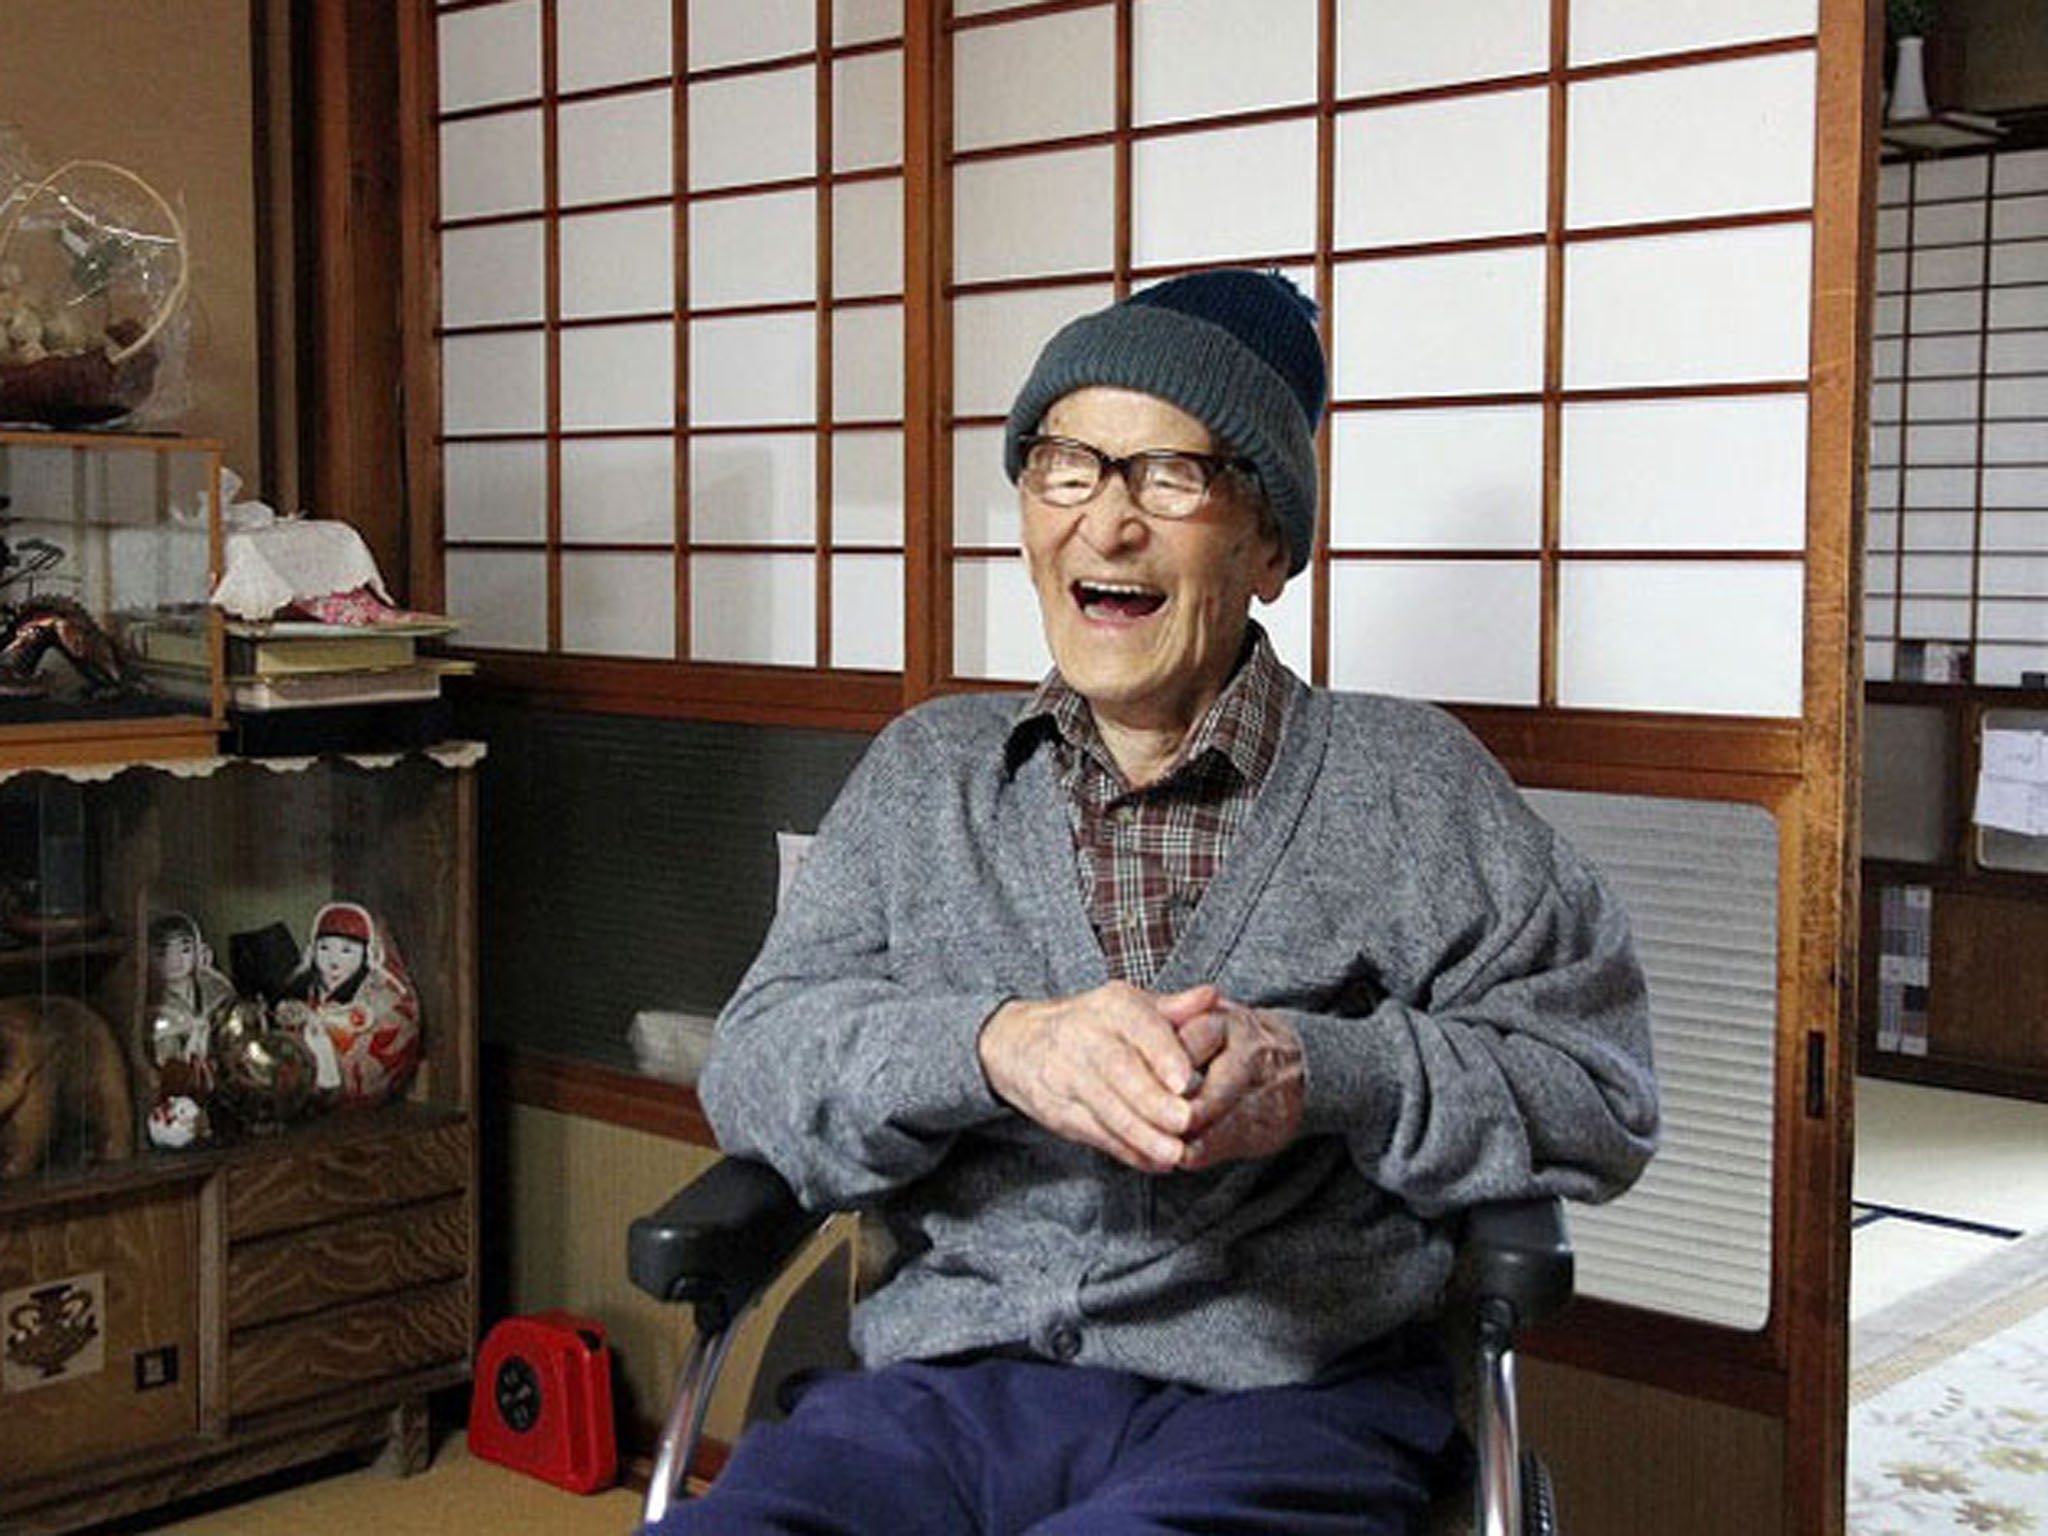 Japanese 115-year-old becomes oldest man in recorded history The Independent The Independent picture pic pic